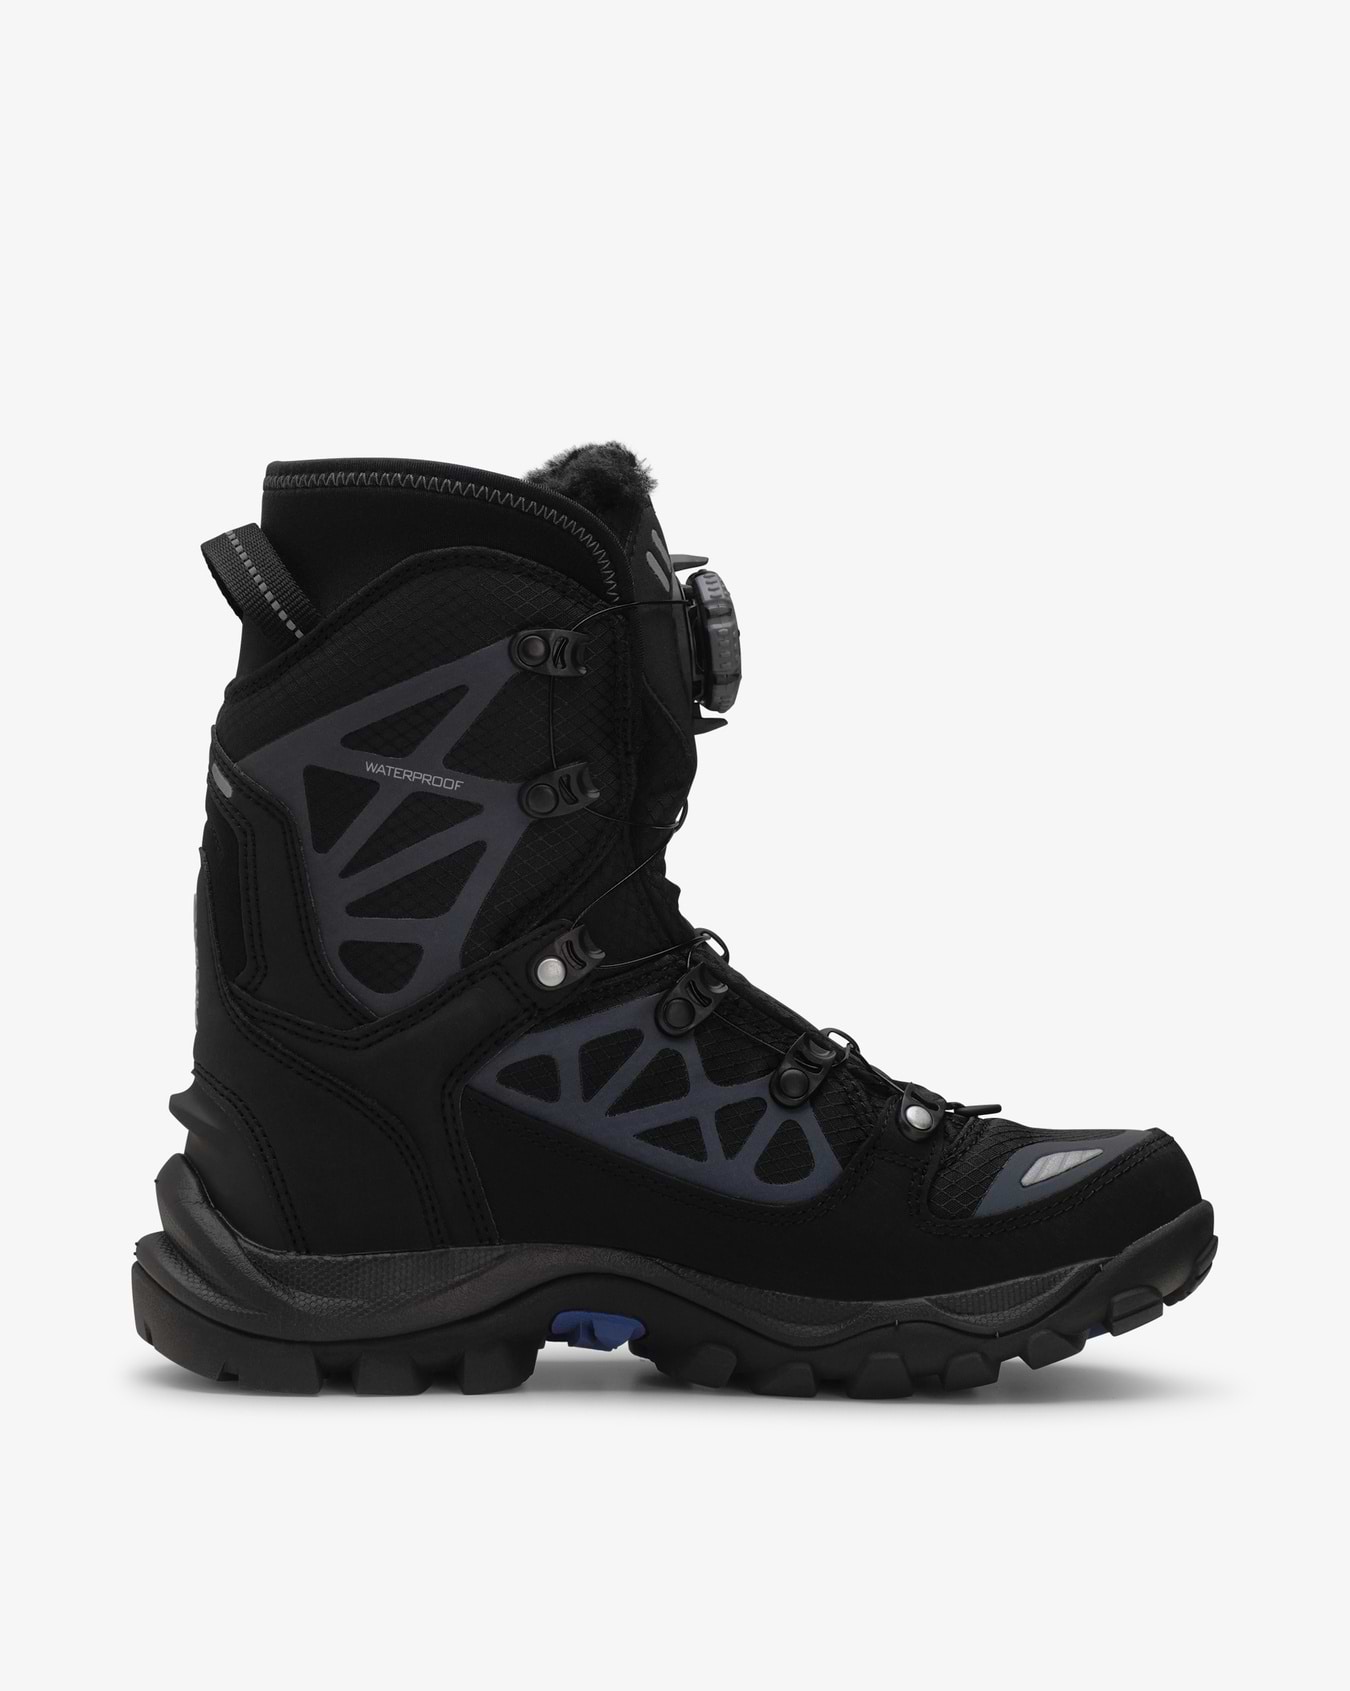 Constrictor 3 High WP BOA Black/Silver Hiking